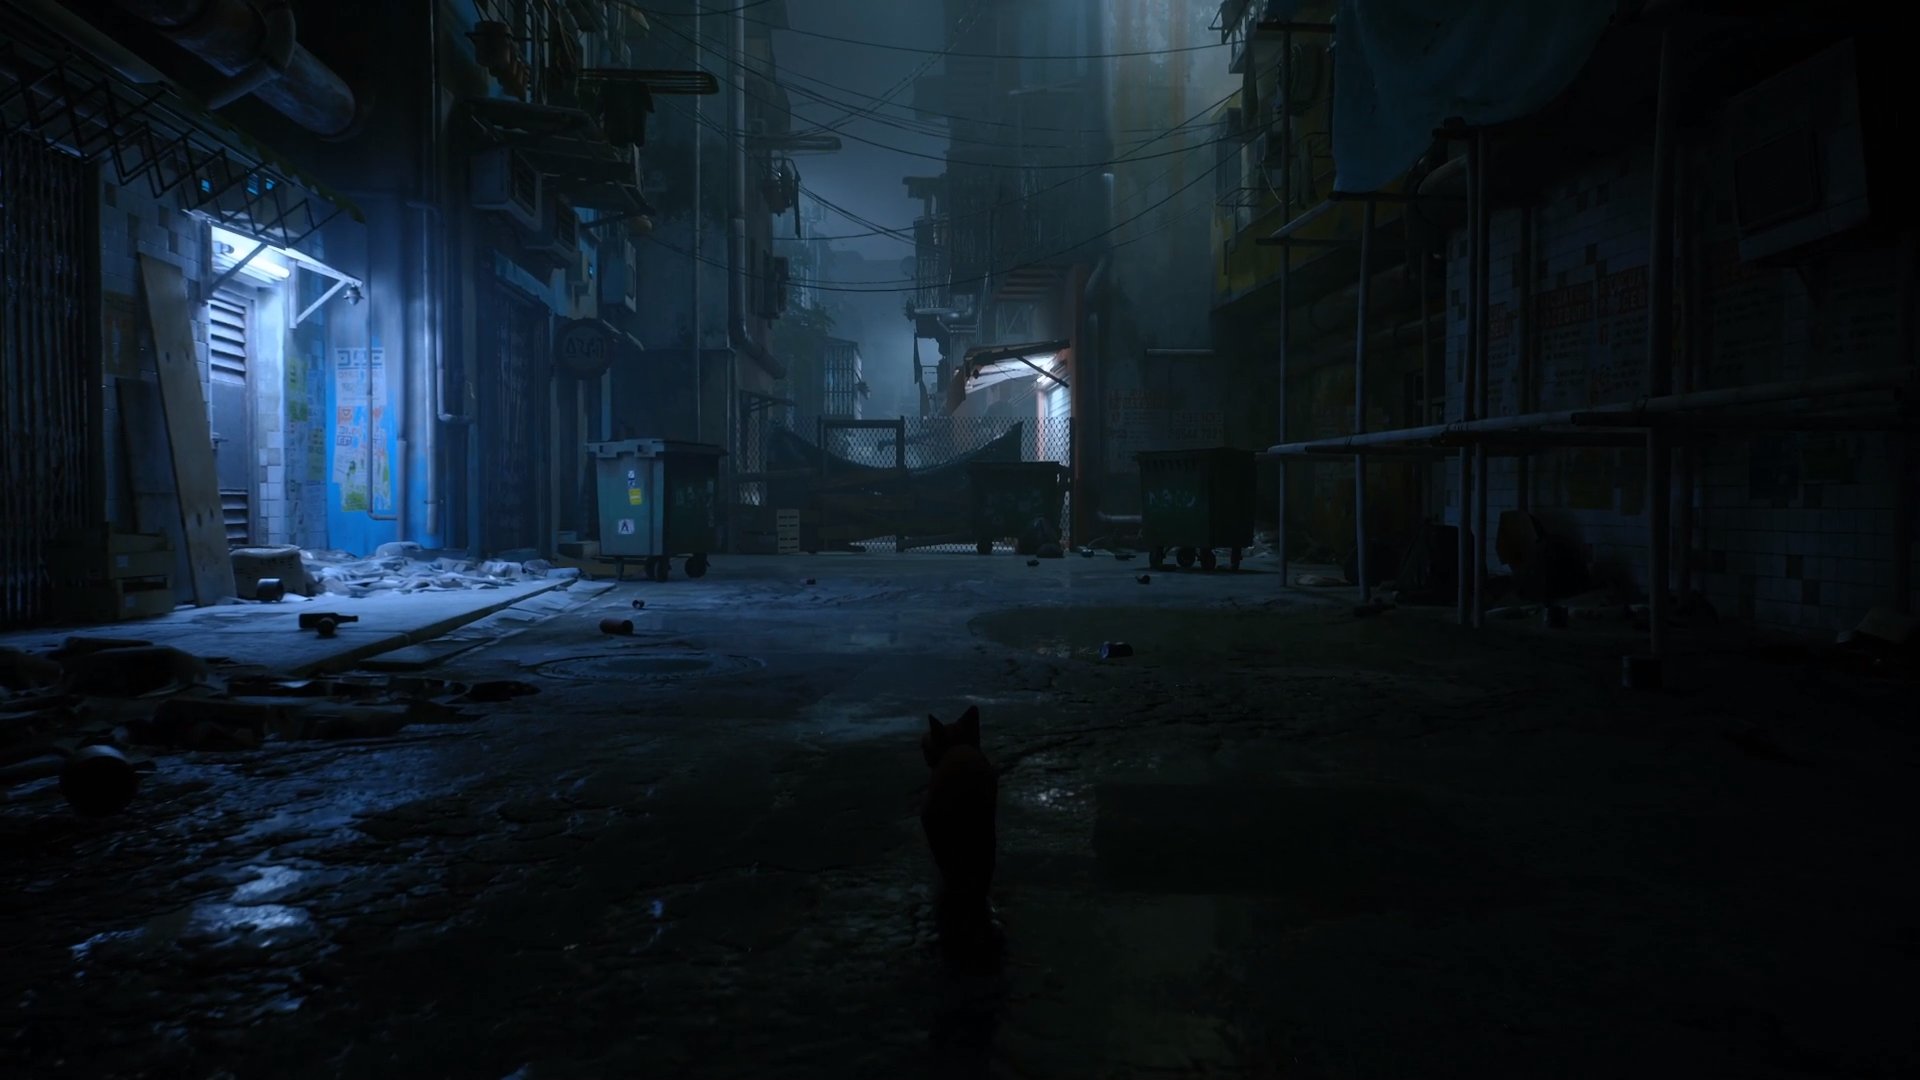 IGN, The Third Person Adventure Game About A Cat Lost In A Robotic Cybercity, Is Finally Coming Out In Early 2022